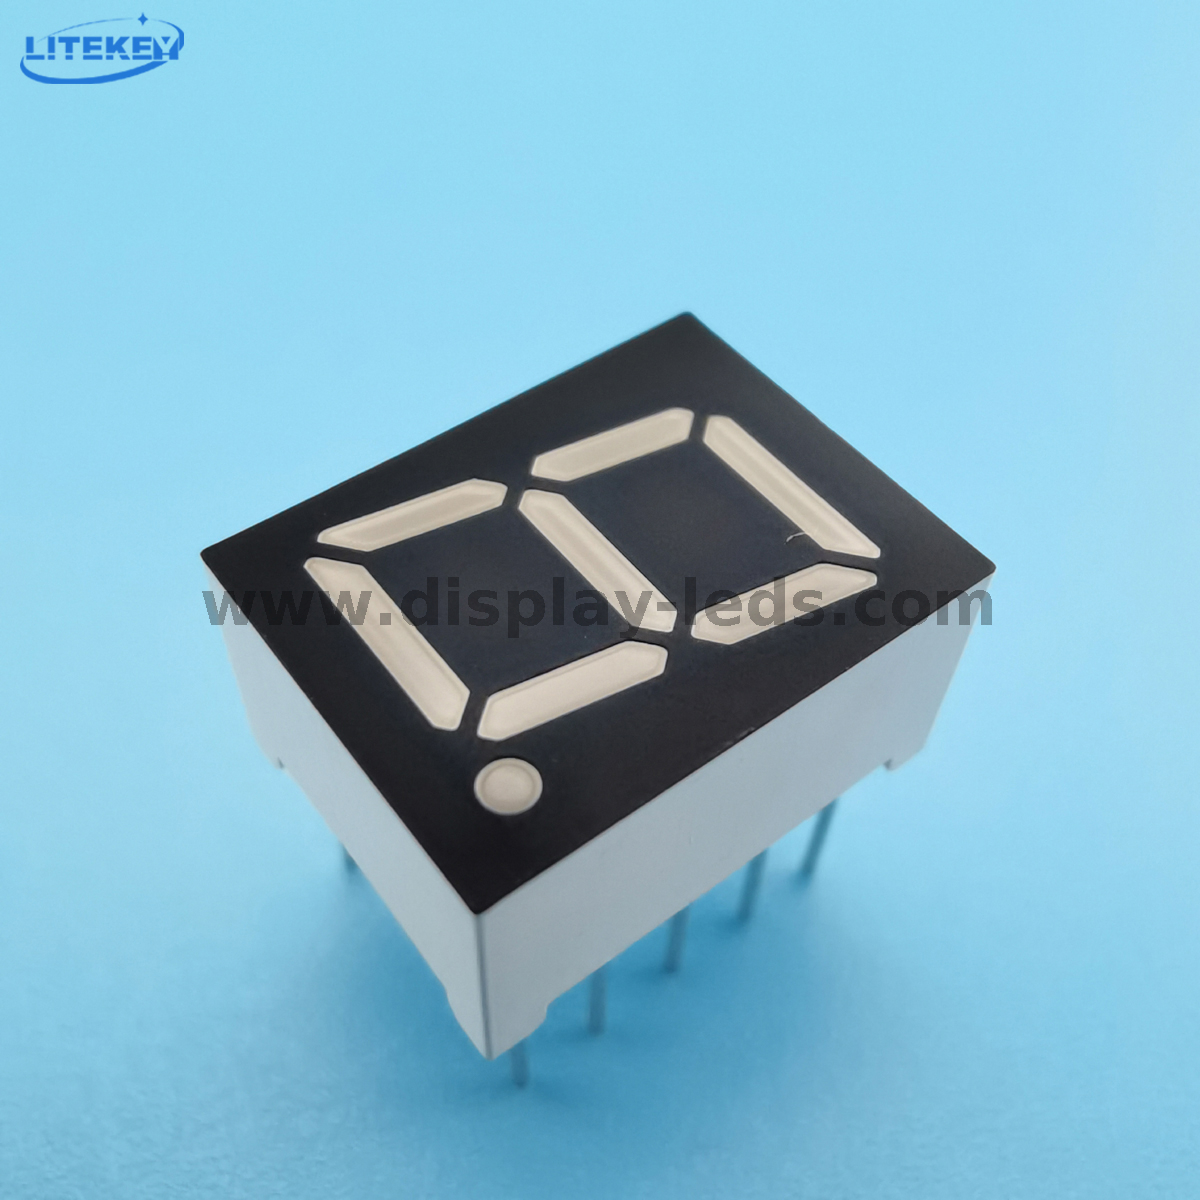 LD3911C/D Series - 0.39inch 1-digit 7 segment display with common pin 1&6